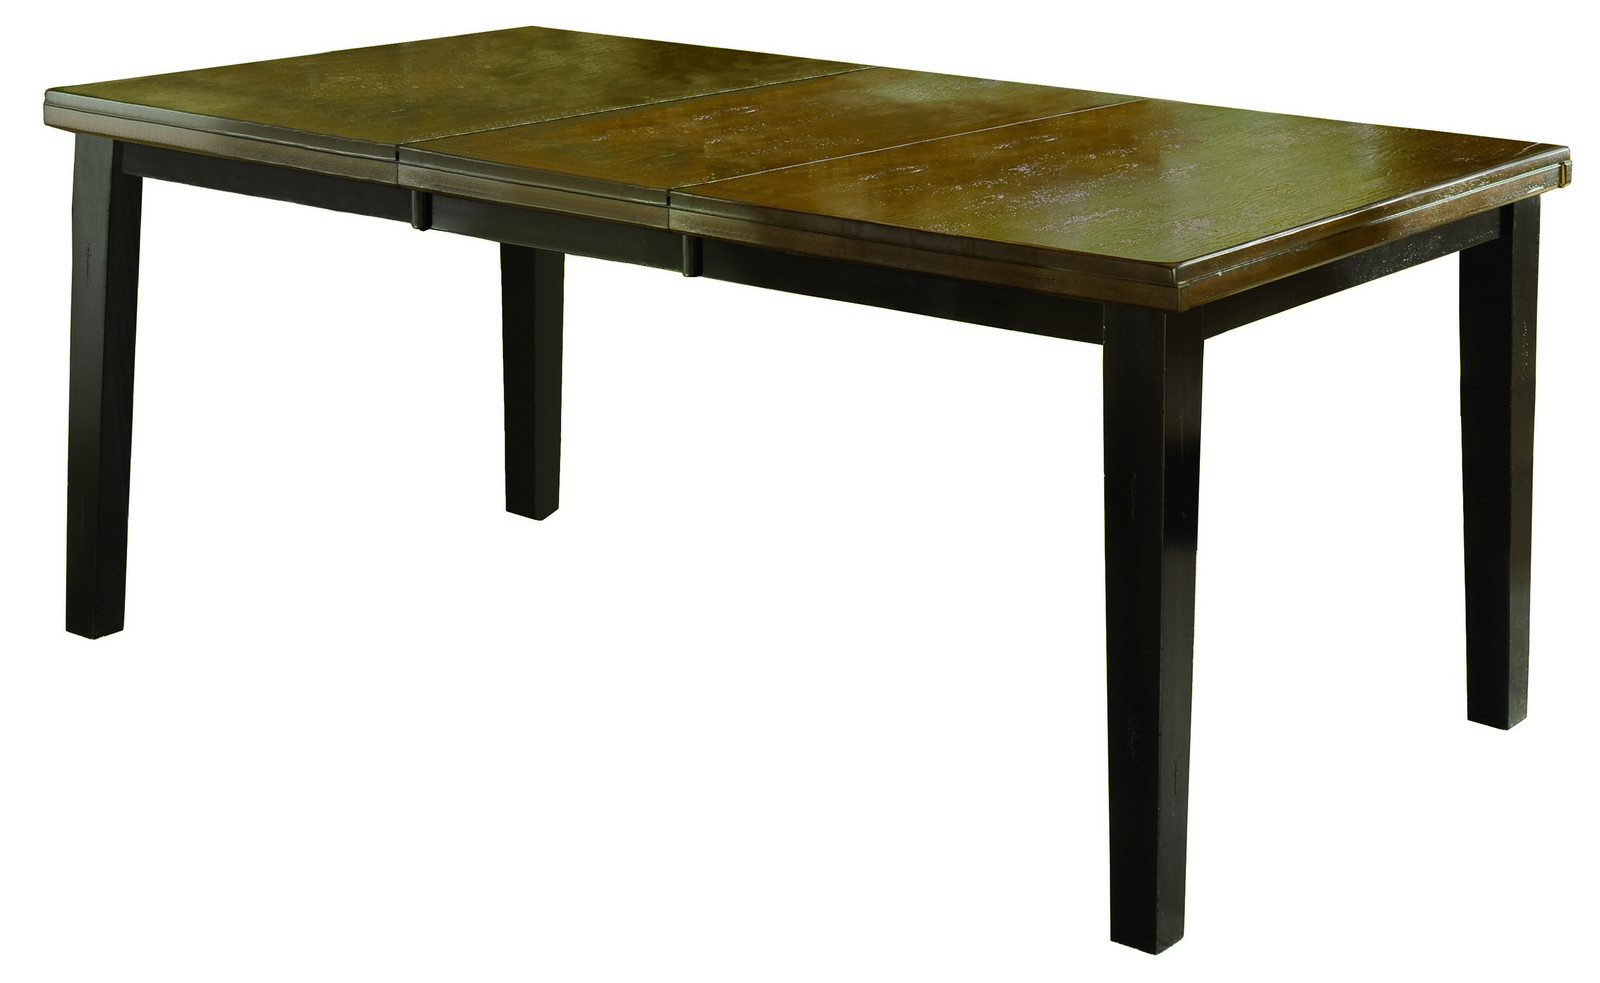 Hillsdale Killarney Dining Table w/Butterfly Leaf - Black/ Antique Brown